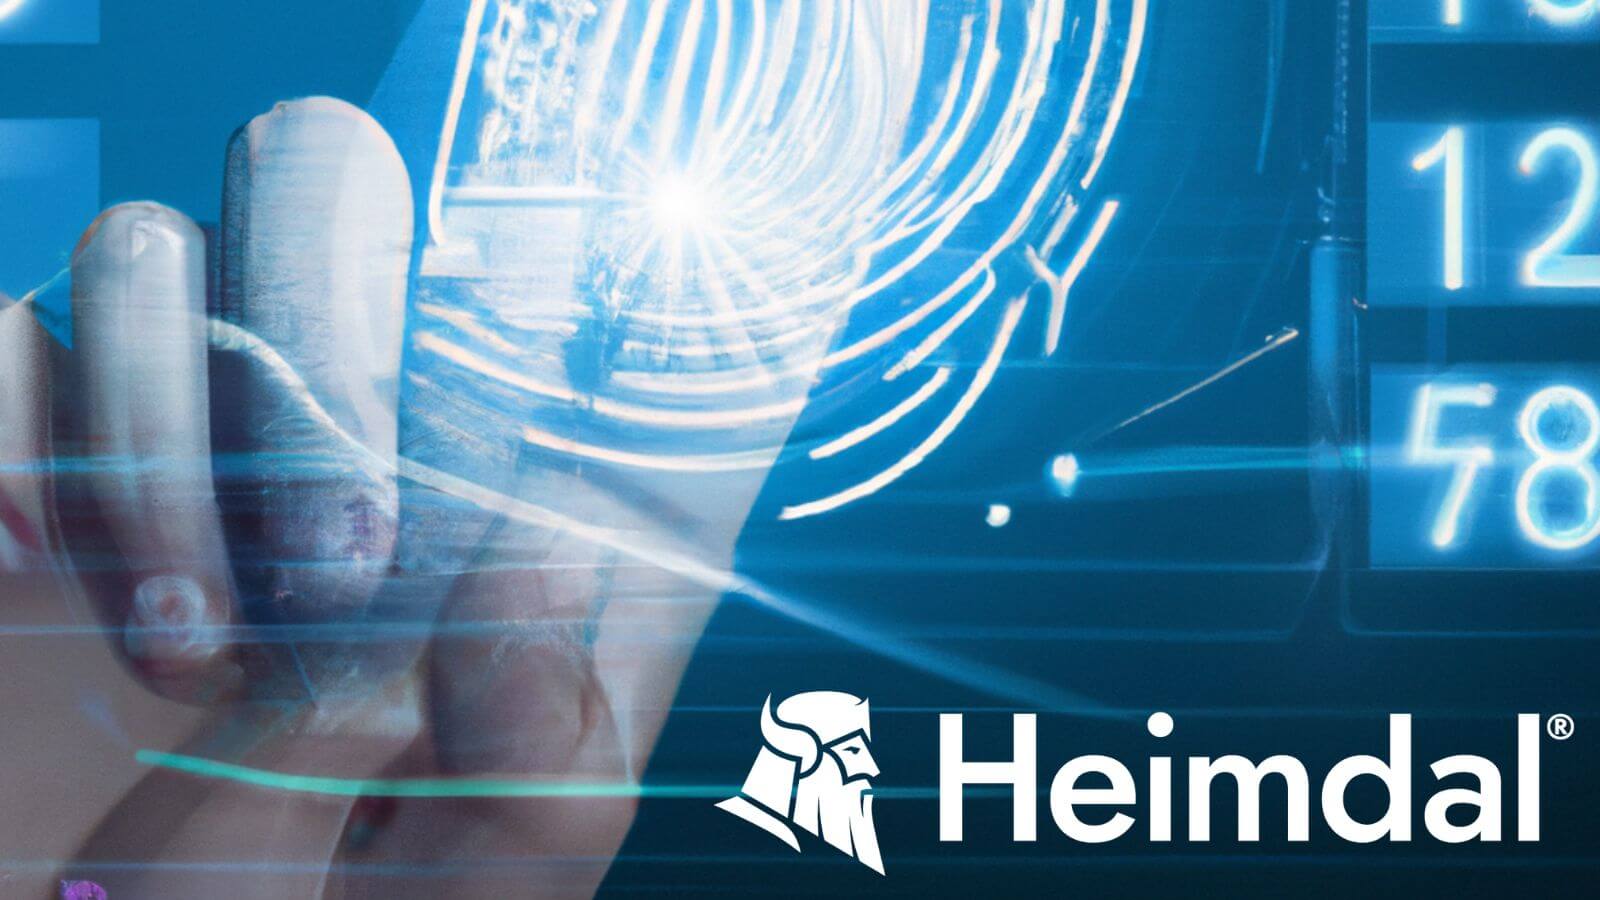 IAM-Driven Biometrics: The Security Issues with Biometric Identity and Access Management – Source: heimdalsecurity.com